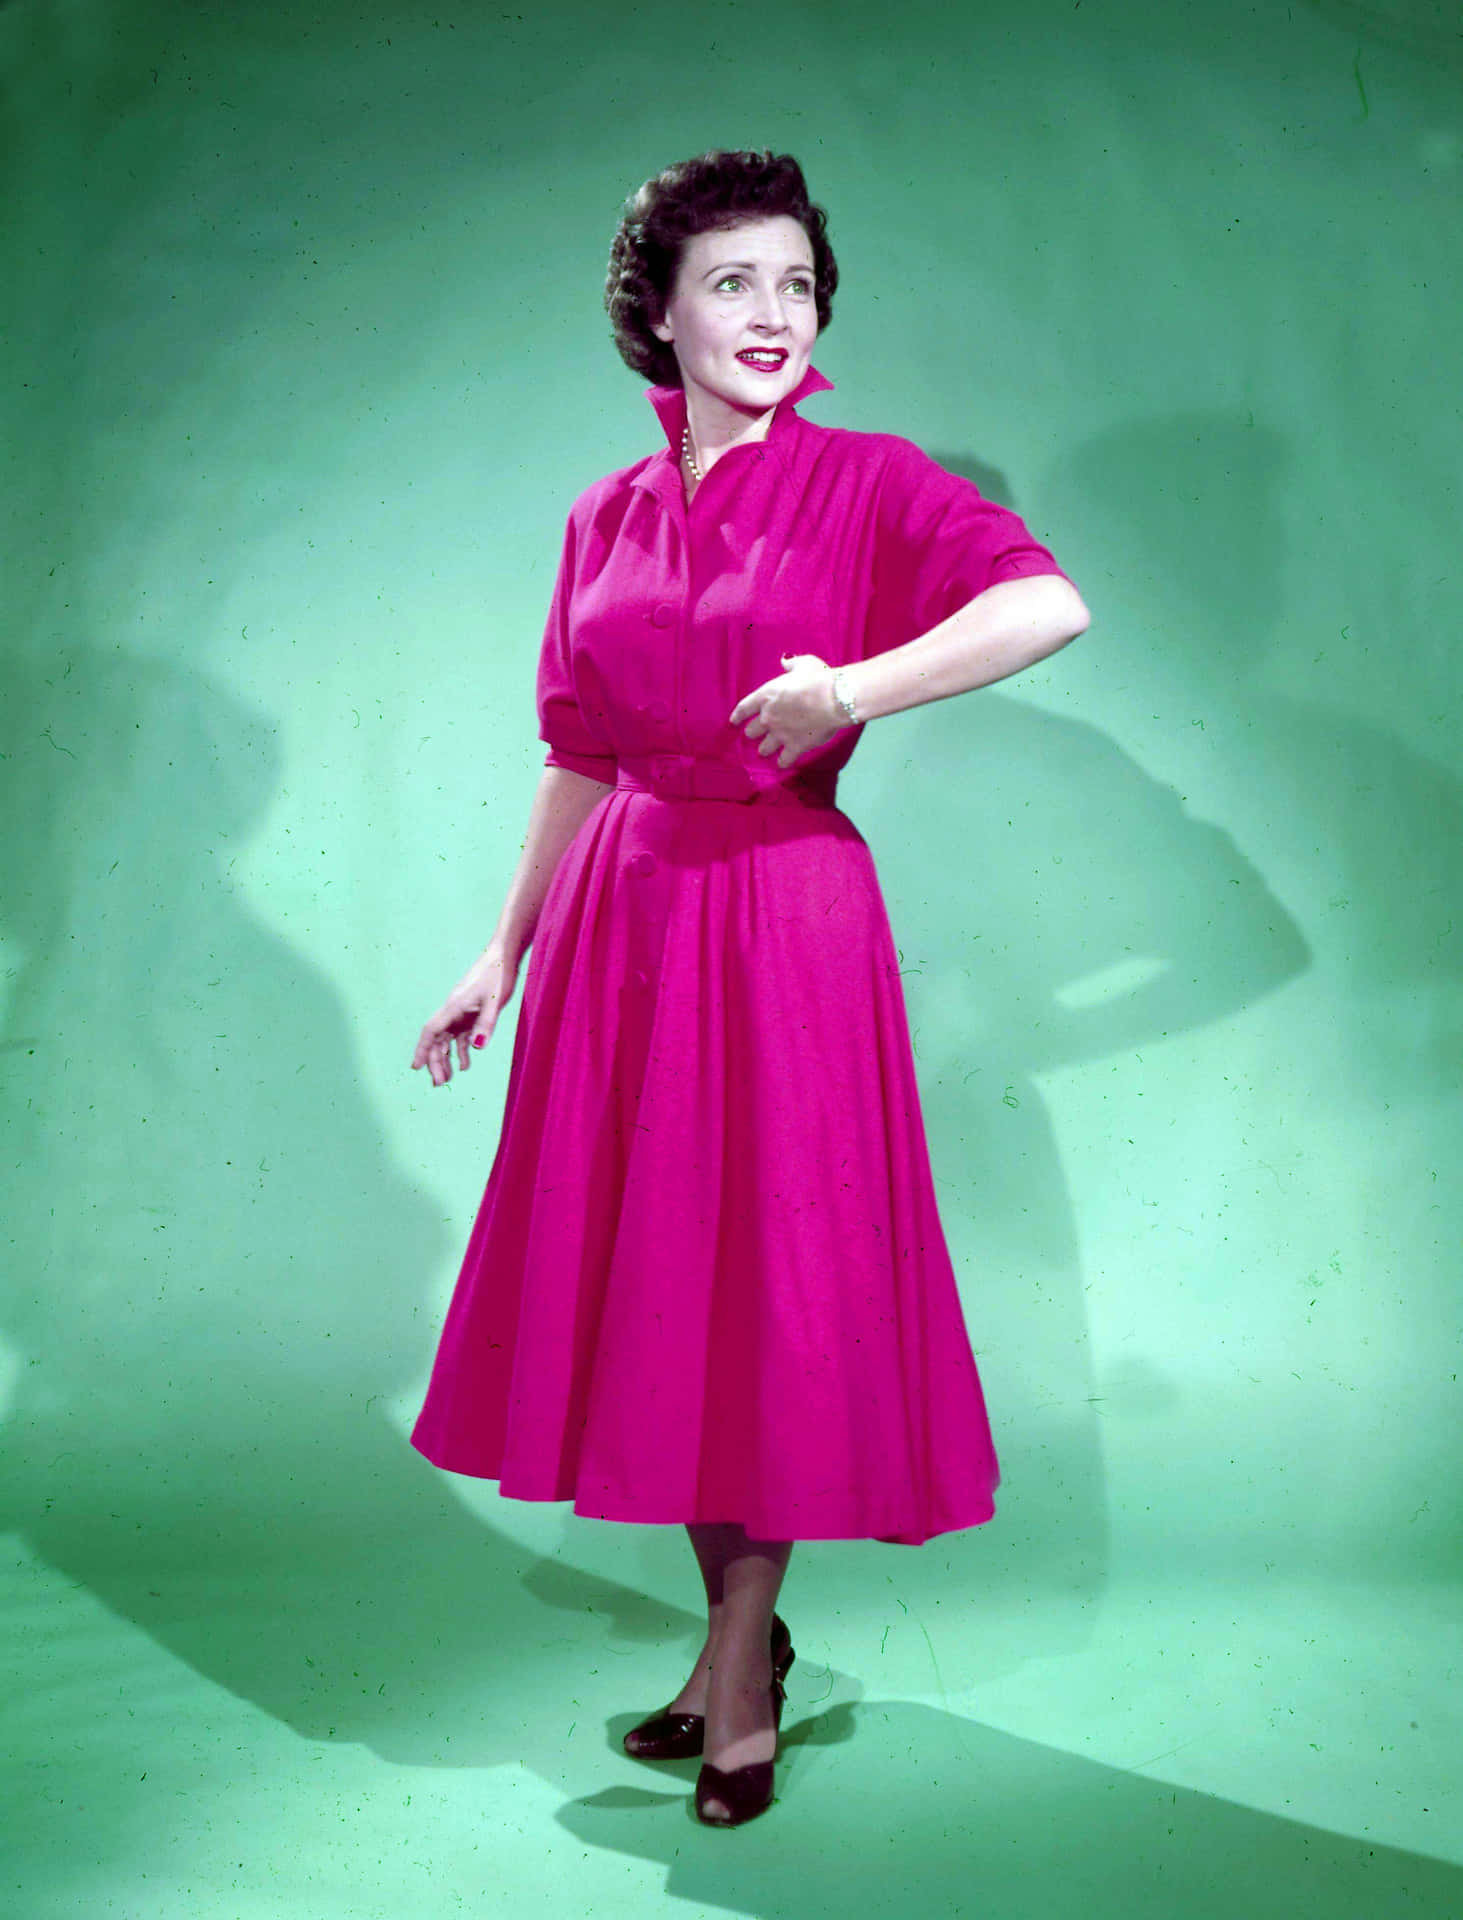 Betty White, America's beloved actress, and comedian